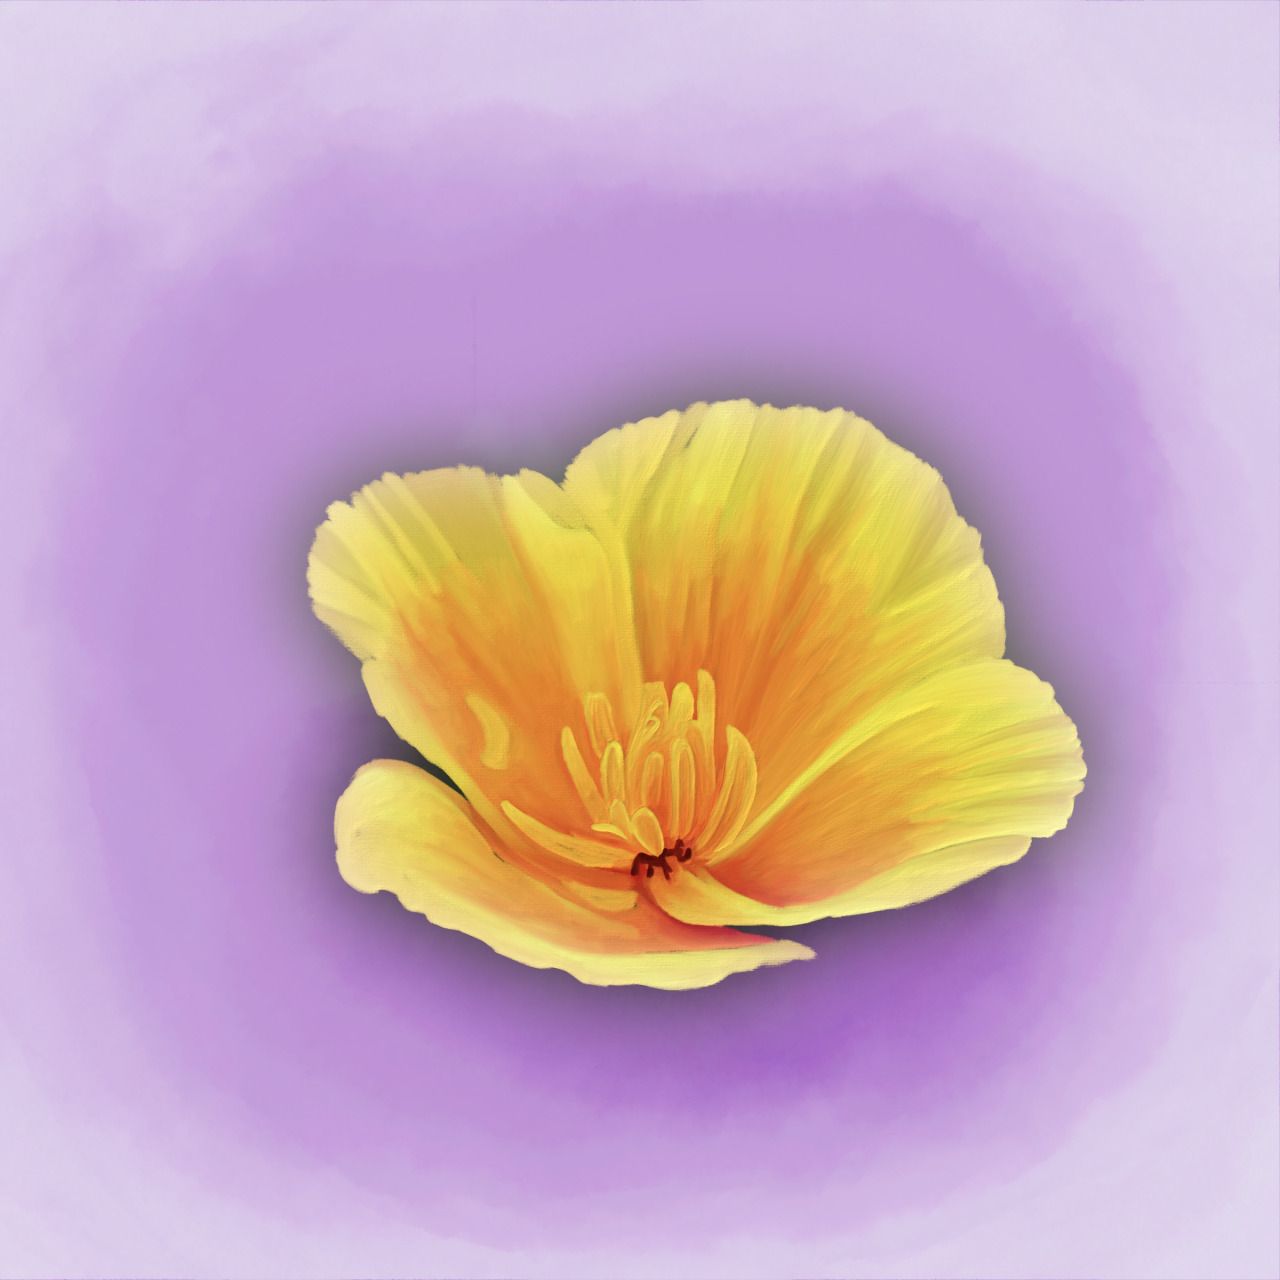 A yellow flower on purple background - Yellow